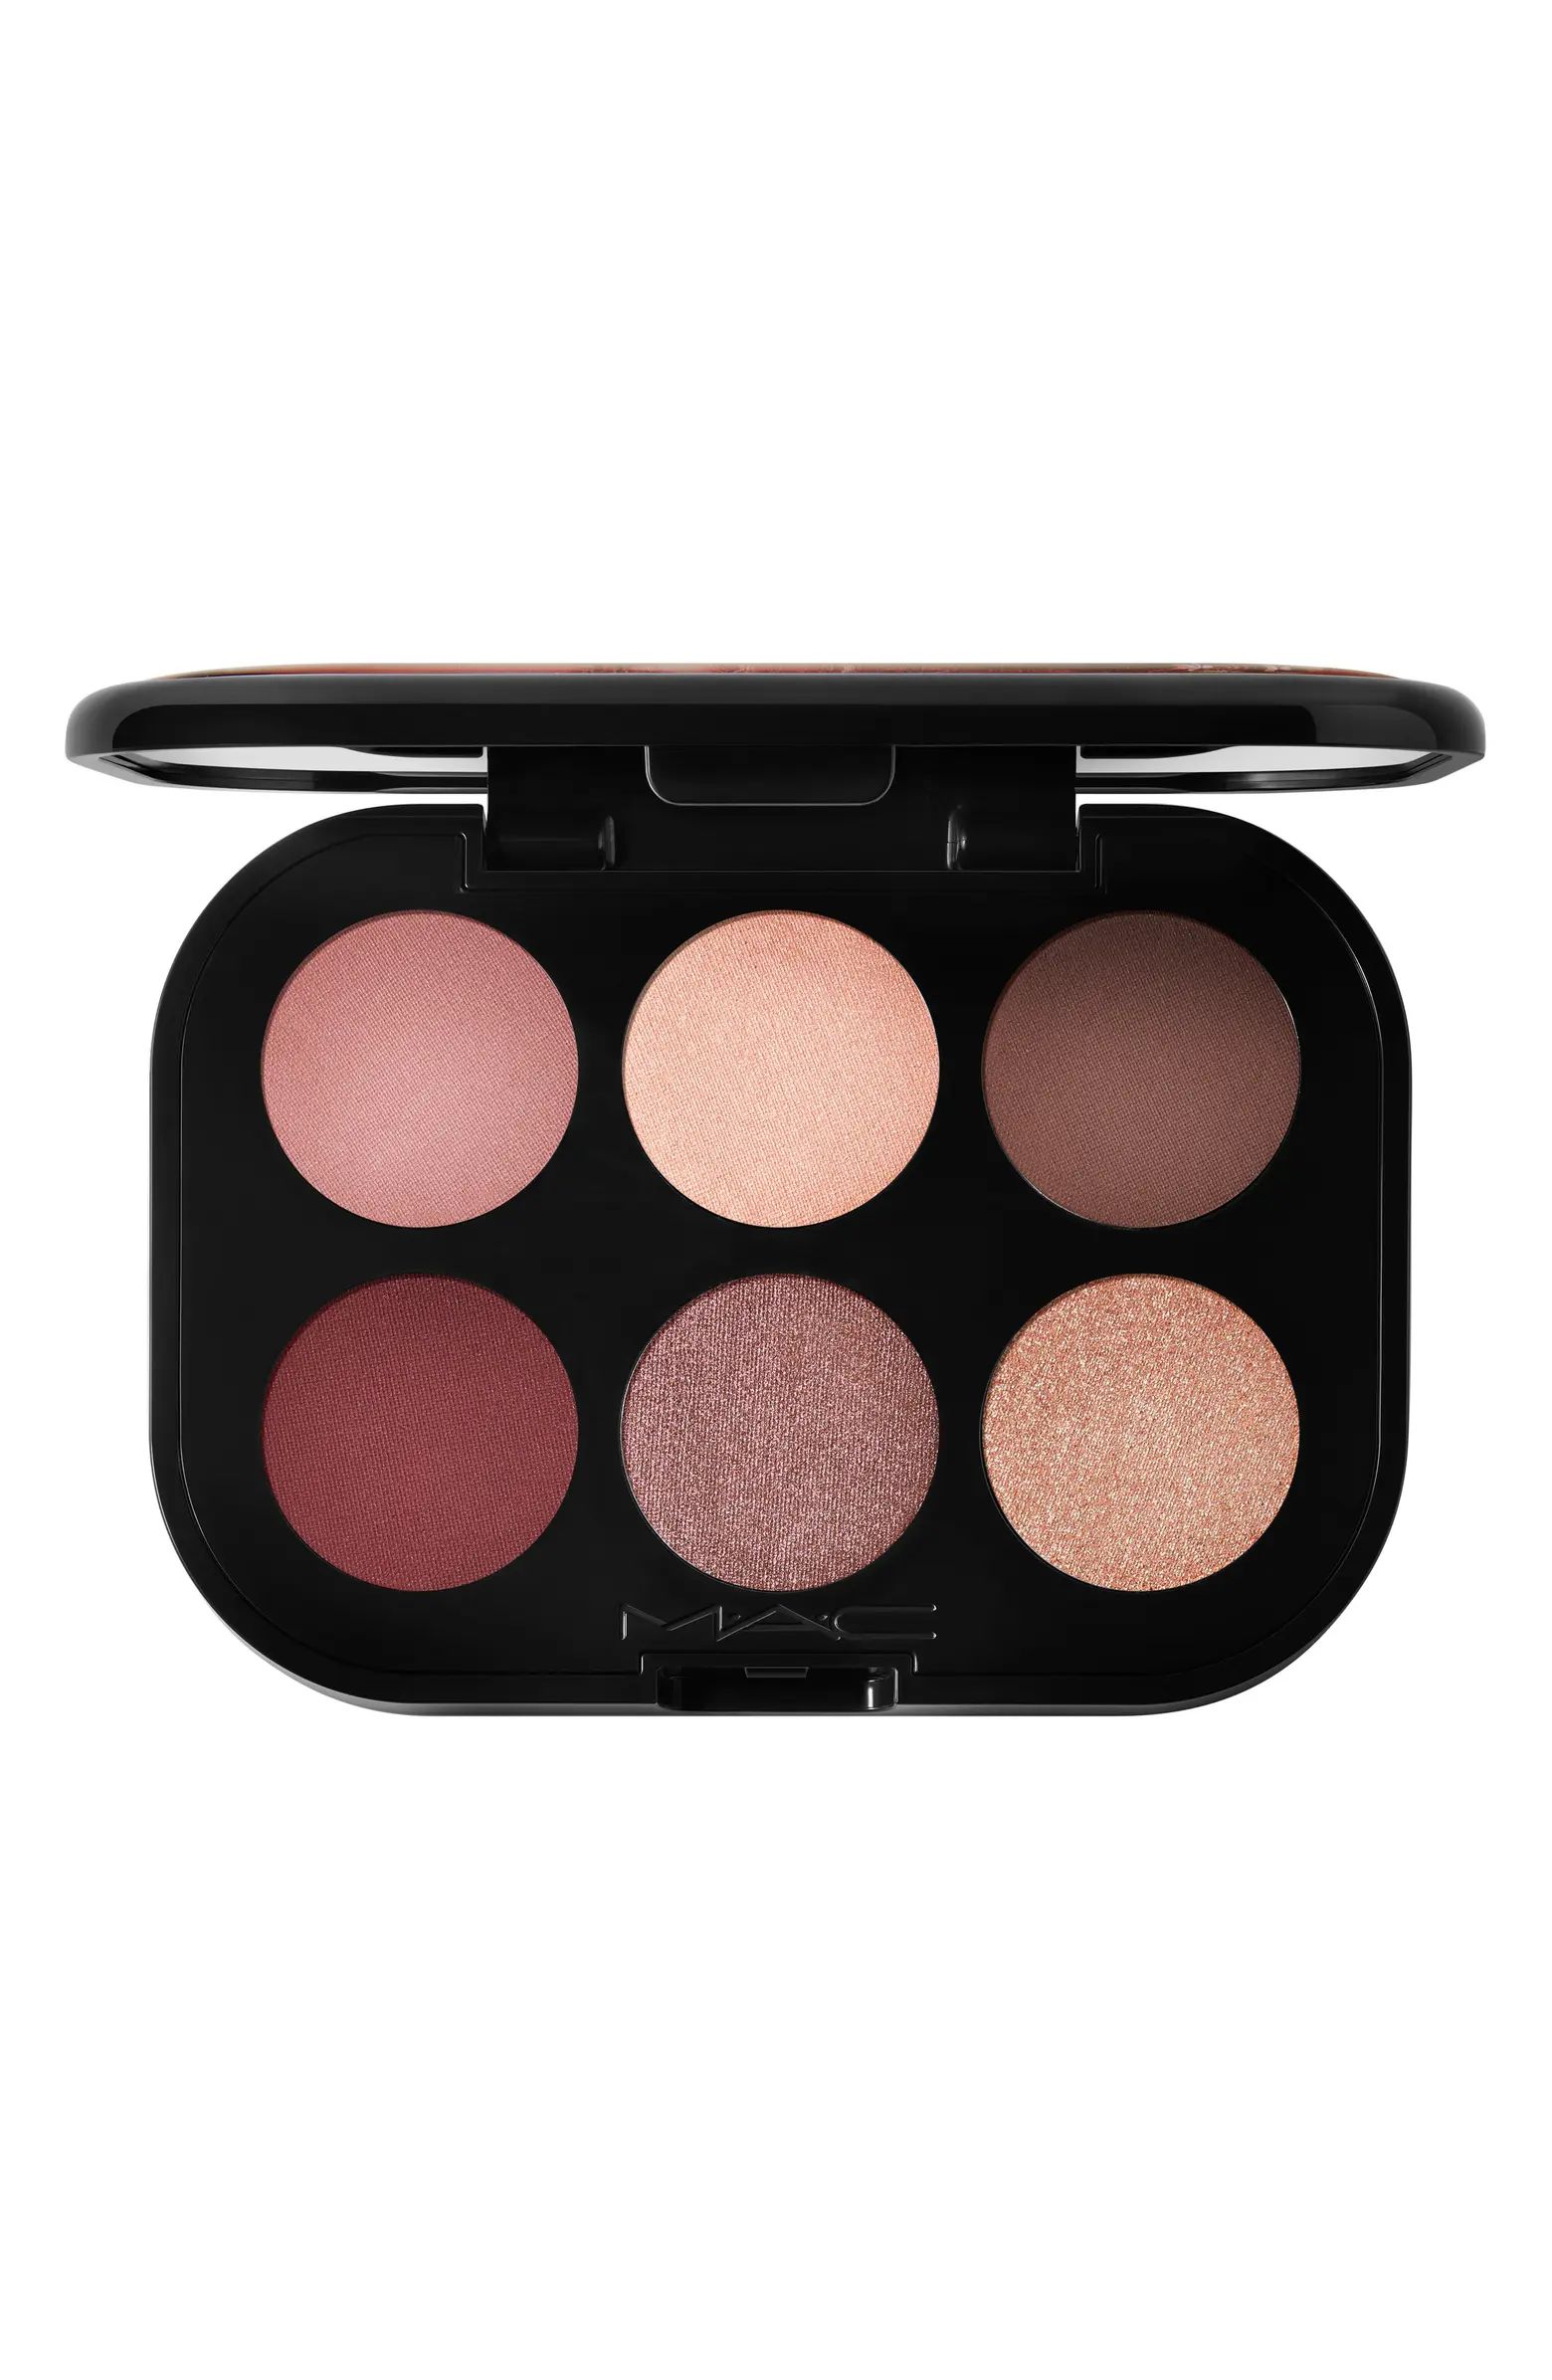 Connect in Color 6-Pan Eyeshadow Palette | Nordstrom